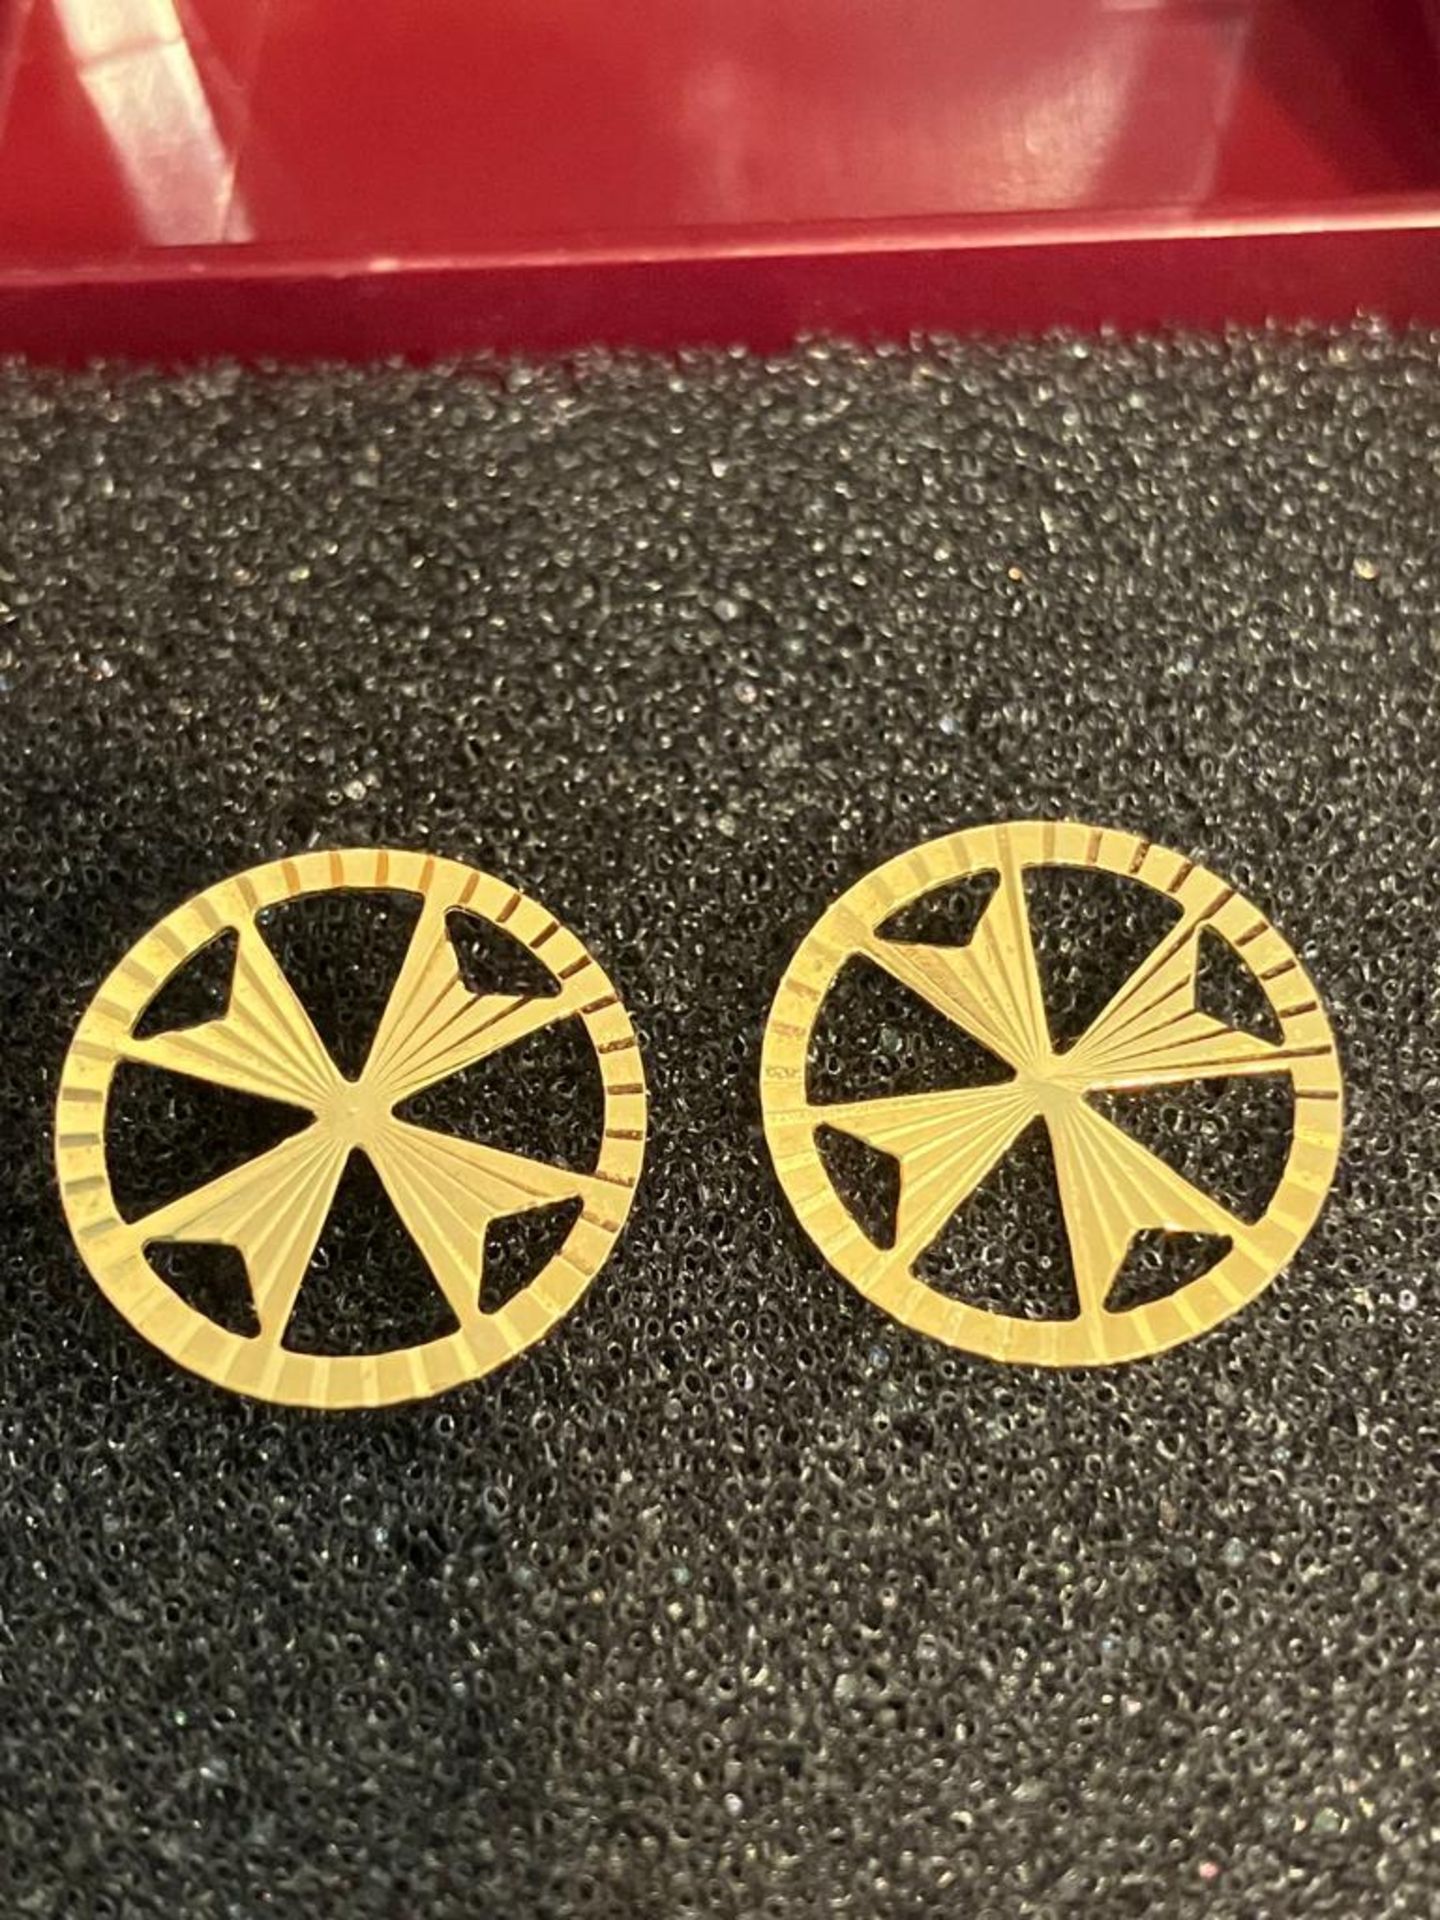 Beautiful 9 carat GOLD pair of MALTESE CROSS EARRINGS with GOLD CIRCLE surround. Complete with 9